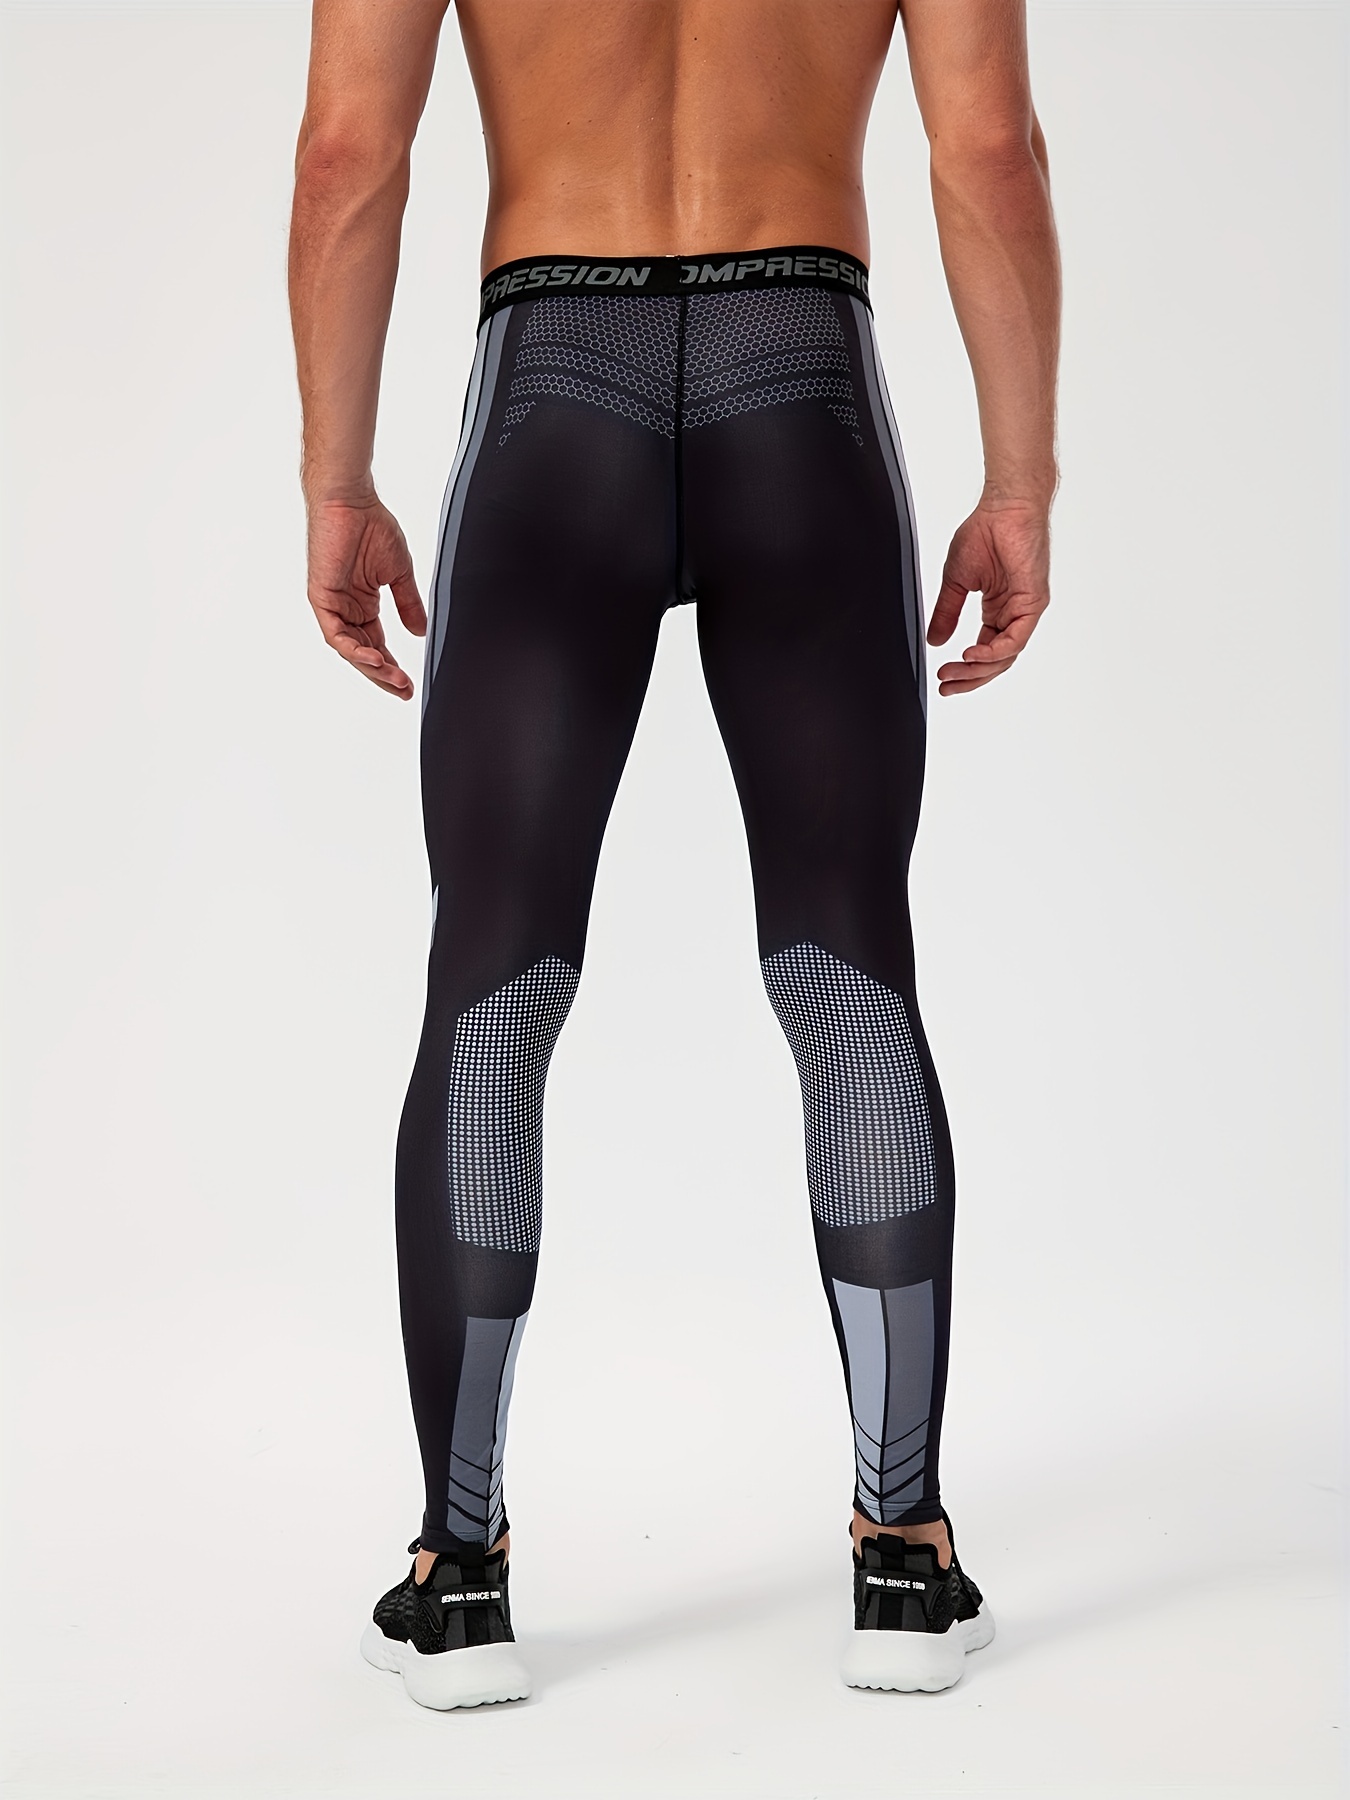 UNDER ARMOUR Printed Men Black Tights - Buy UNDER ARMOUR Printed